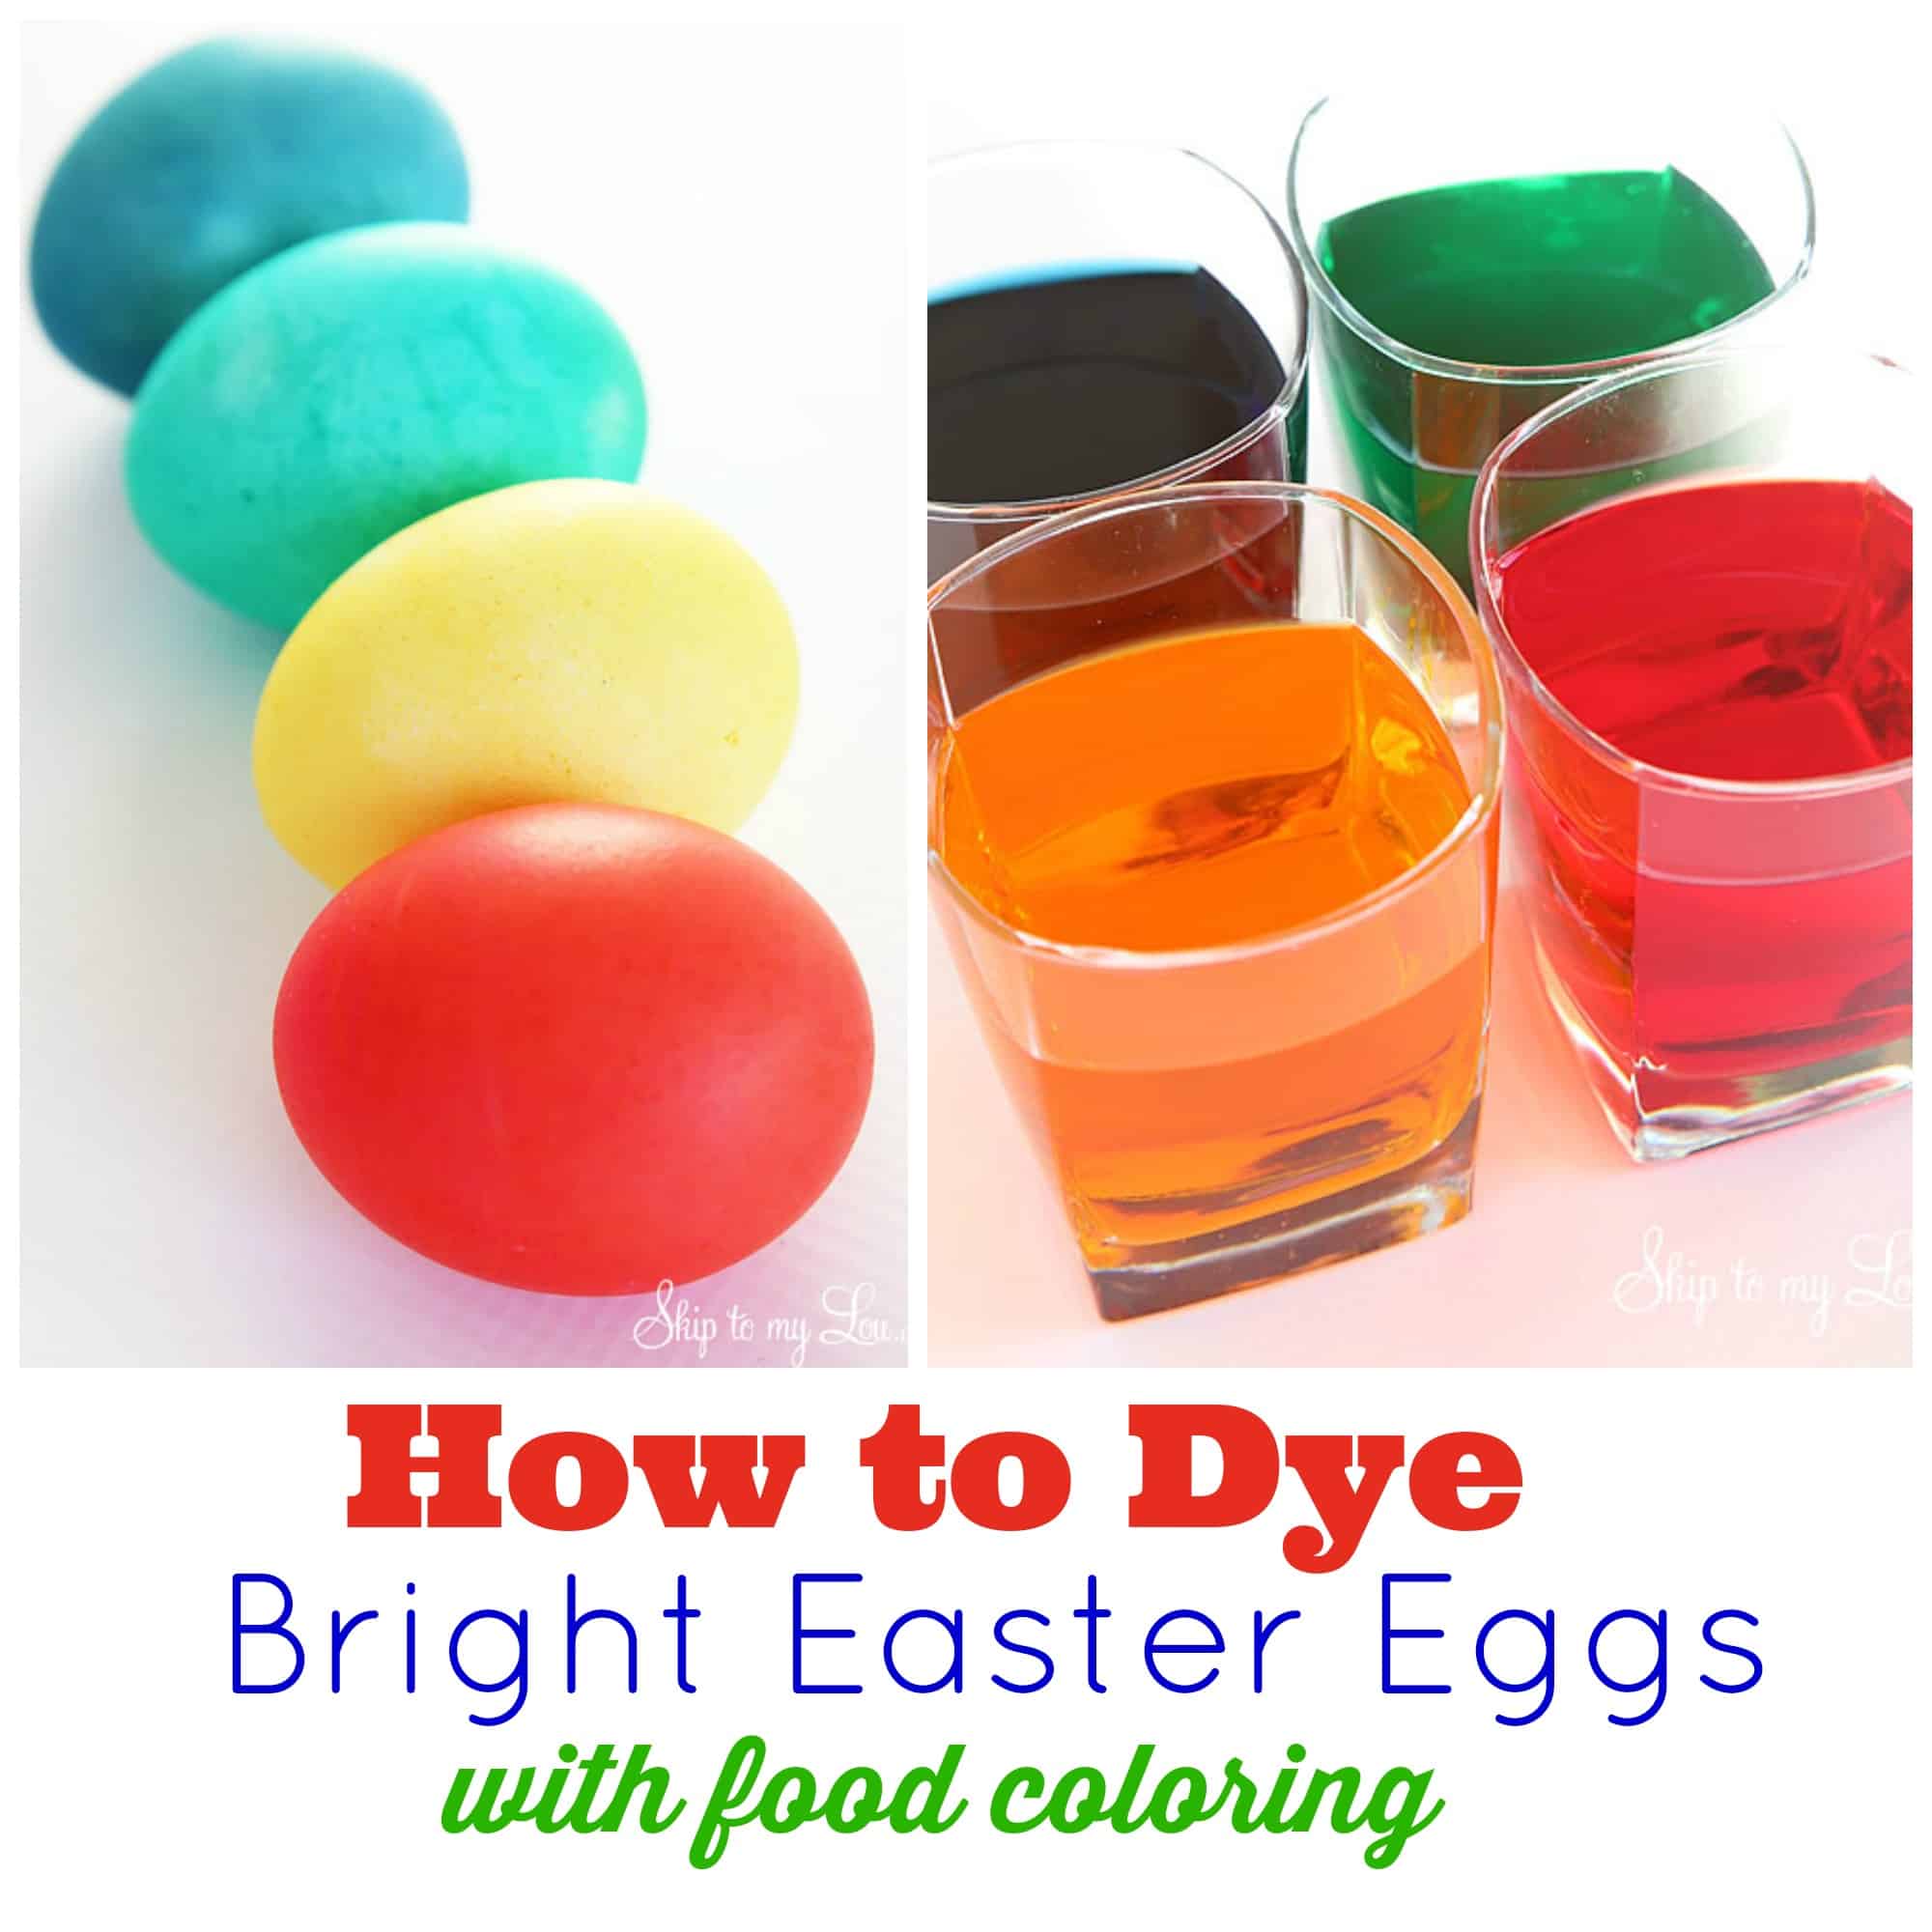 How to dye eggs with food coloring | Skip To My Lou